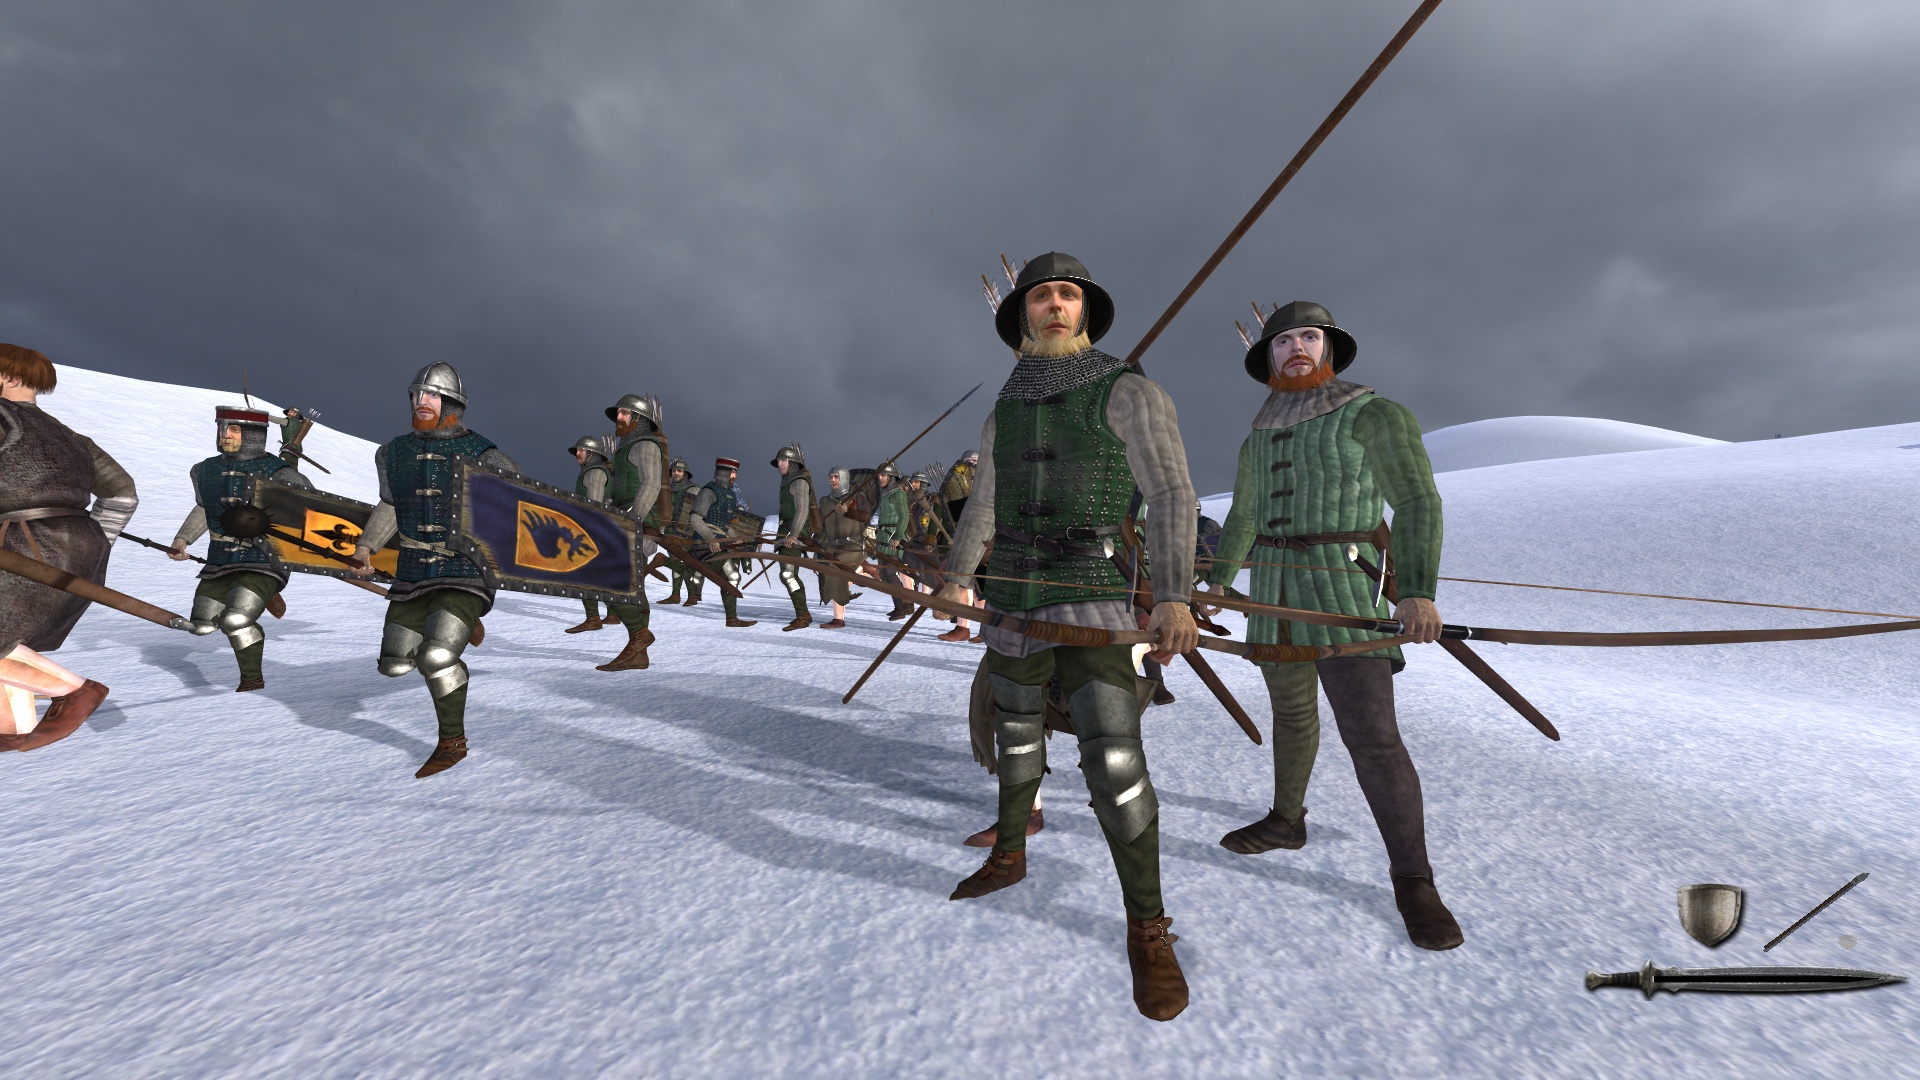 Warband warsword conquest. Mount and Blade Warsword Conquest. Mount and Blade Warband Warsword Conquest. Mount and Blade разбойники.